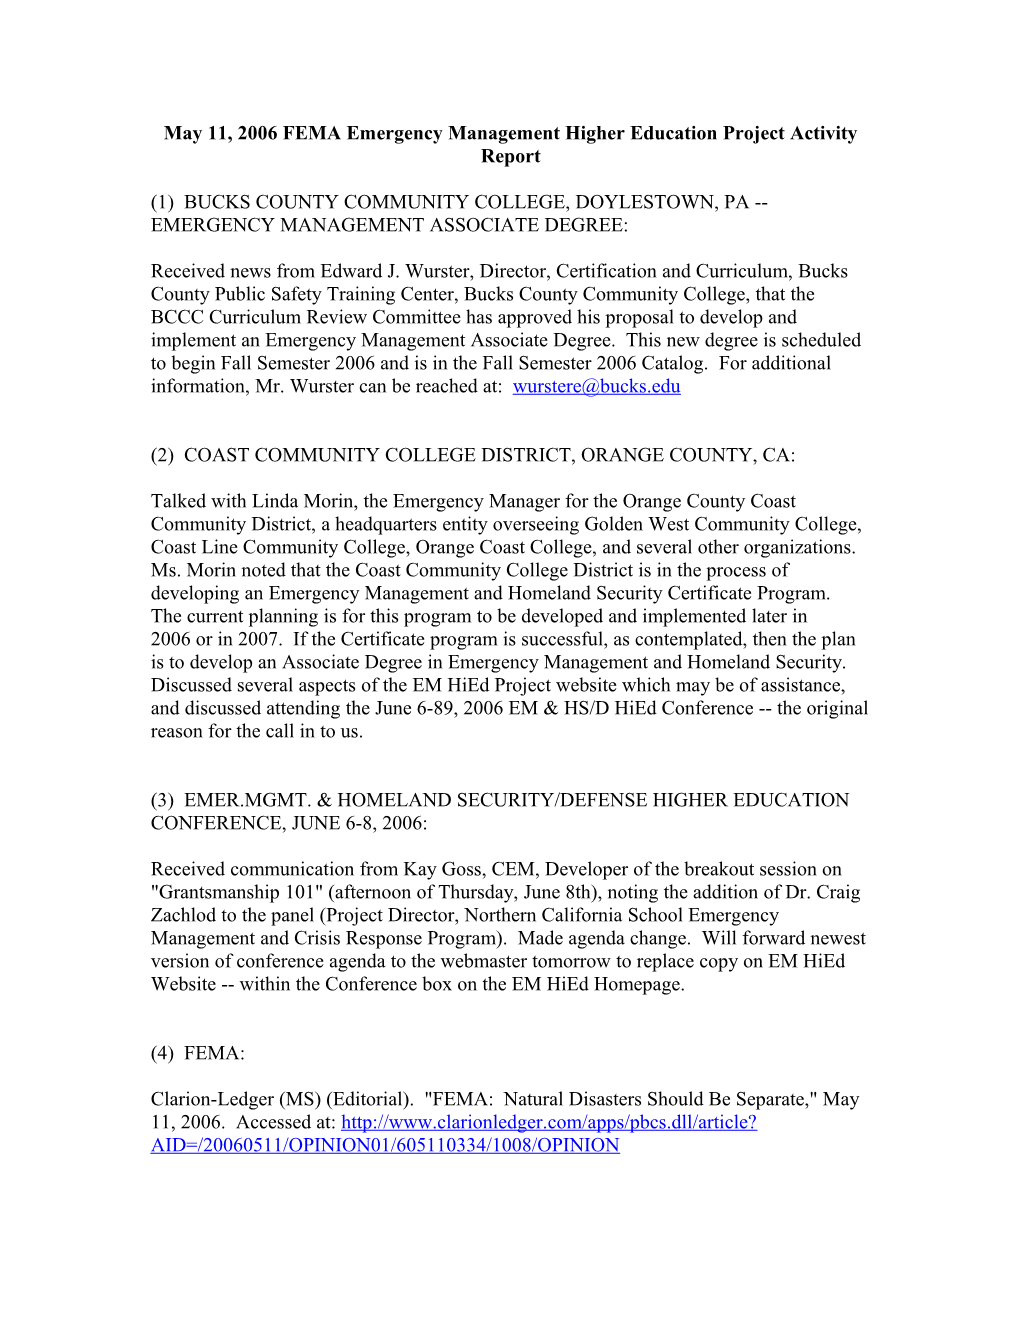 May 11, 2006 FEMA Emergency Management Higher Education Project Activity Report